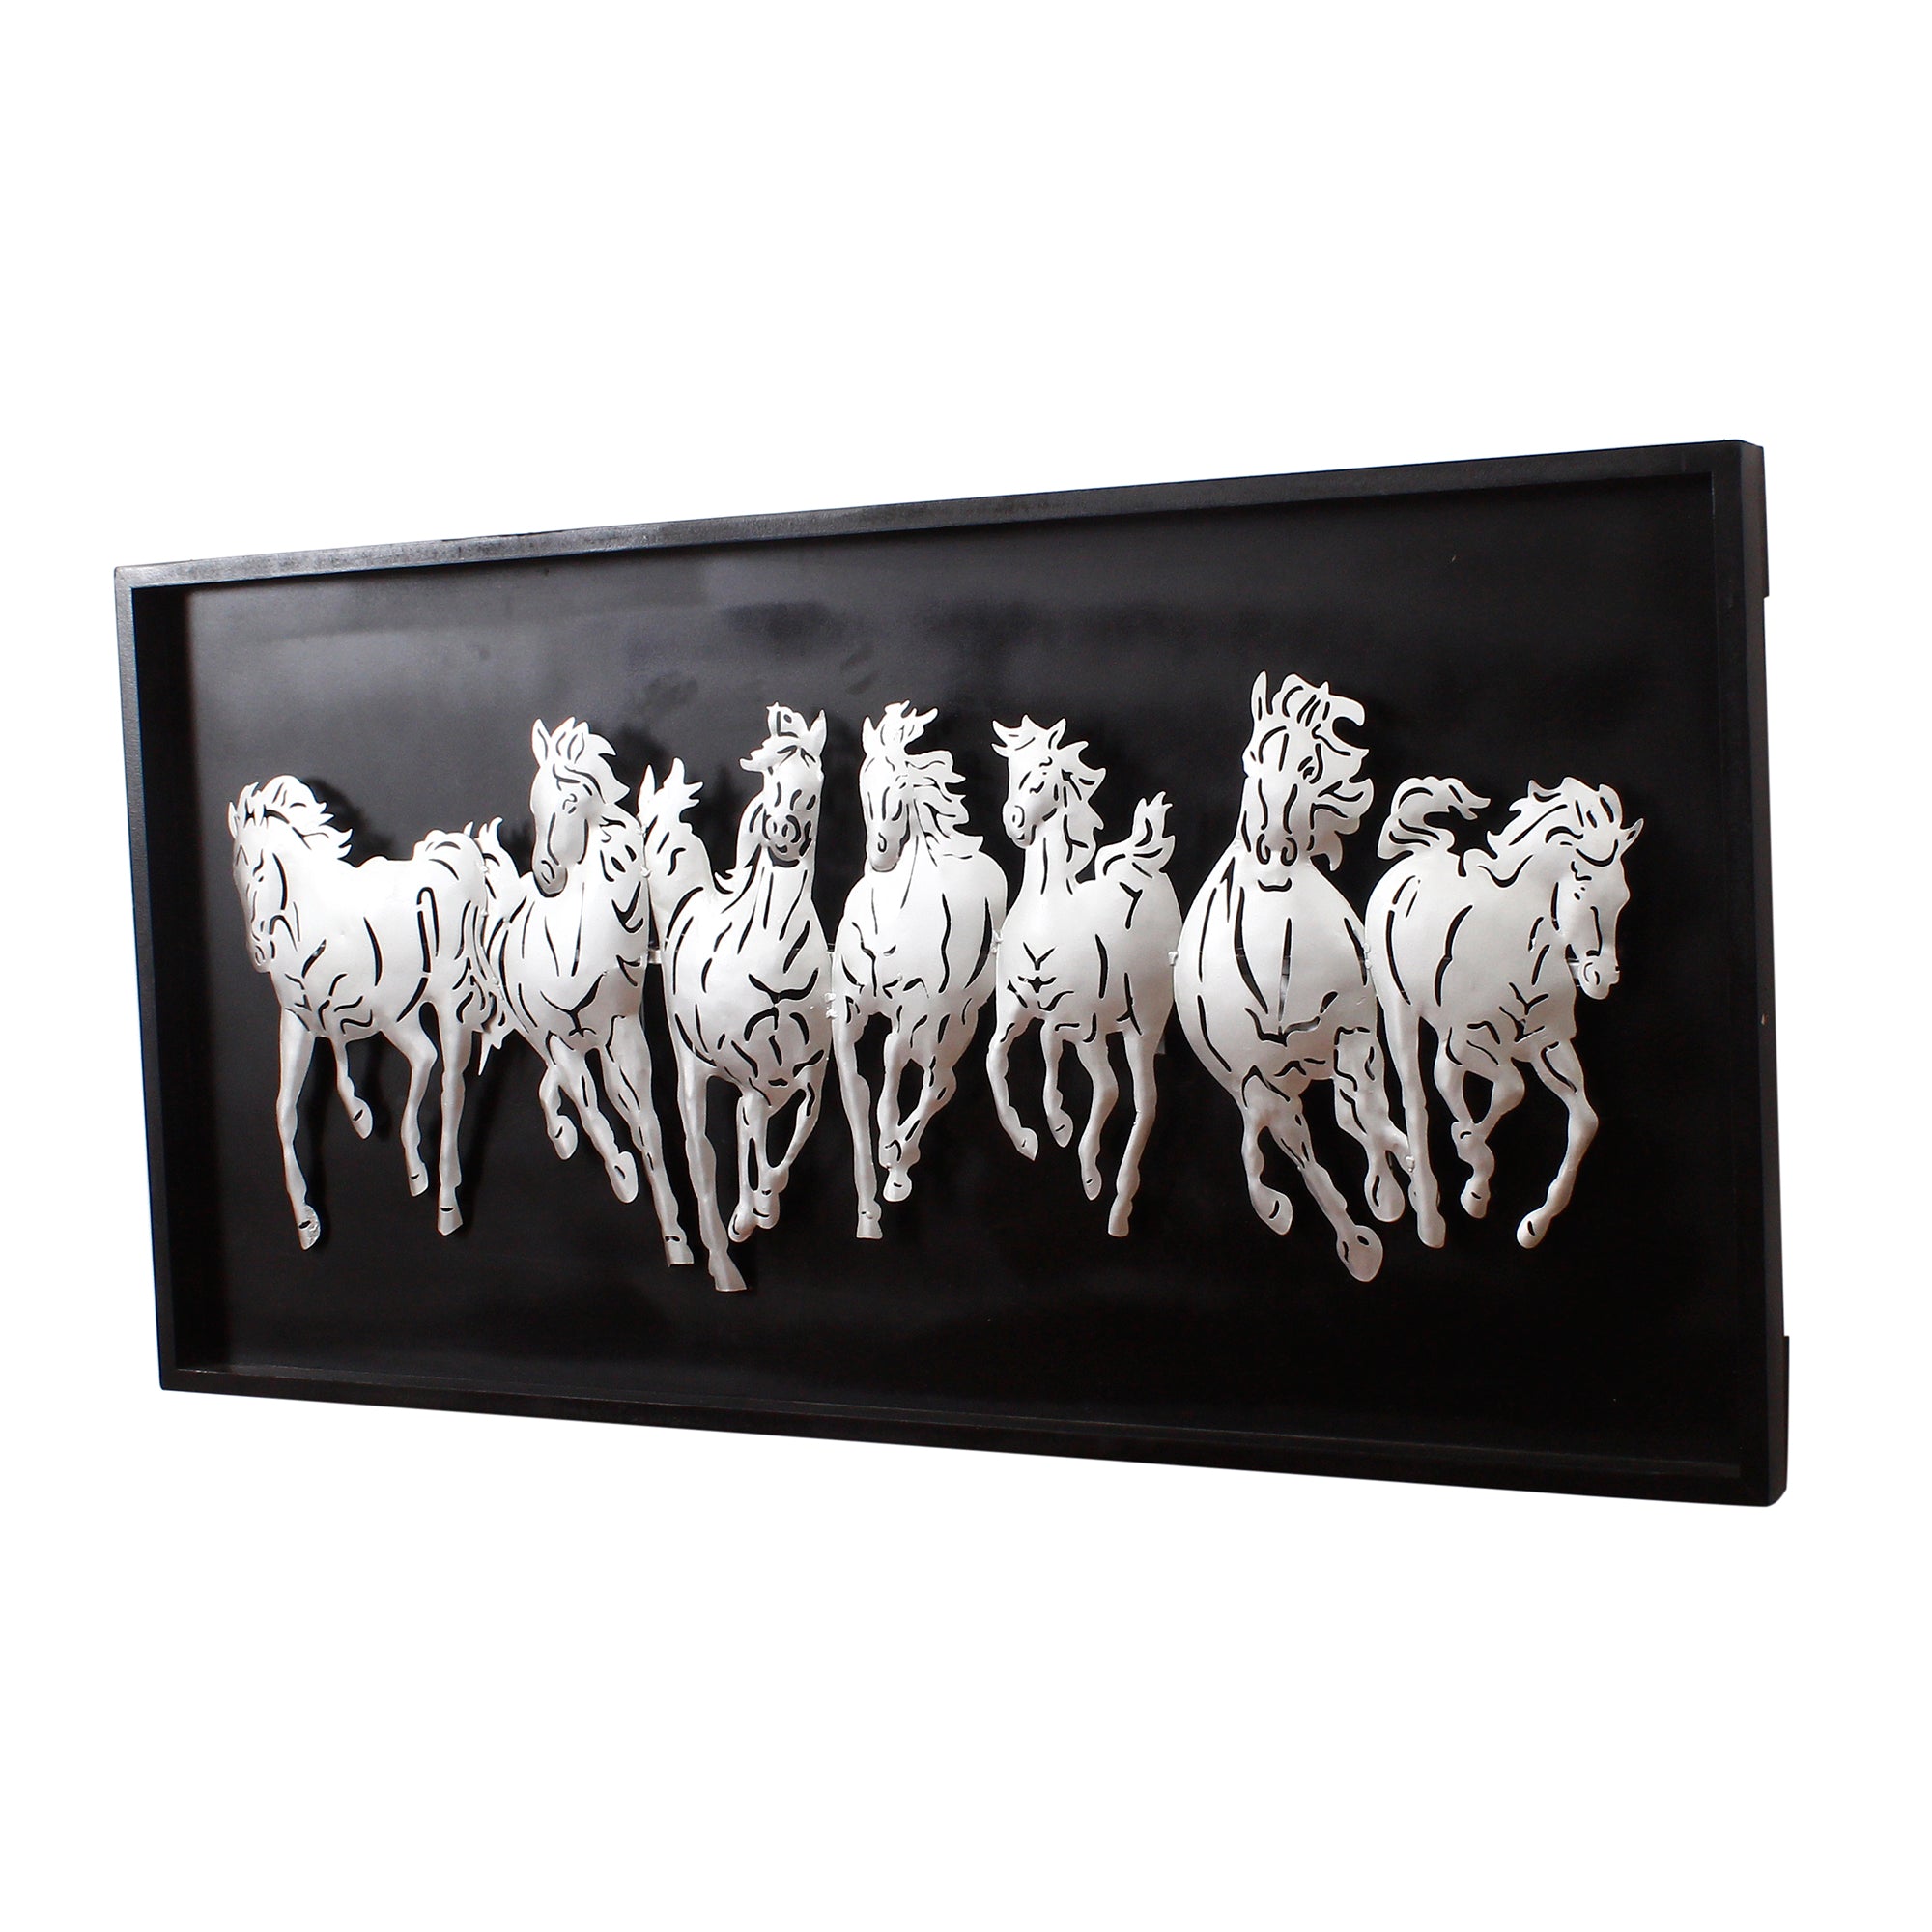 Black and Silver 7 Running Horses empanalled in Wooden Frame Handcrafted Metal Wall Hanging with Background LED's 5